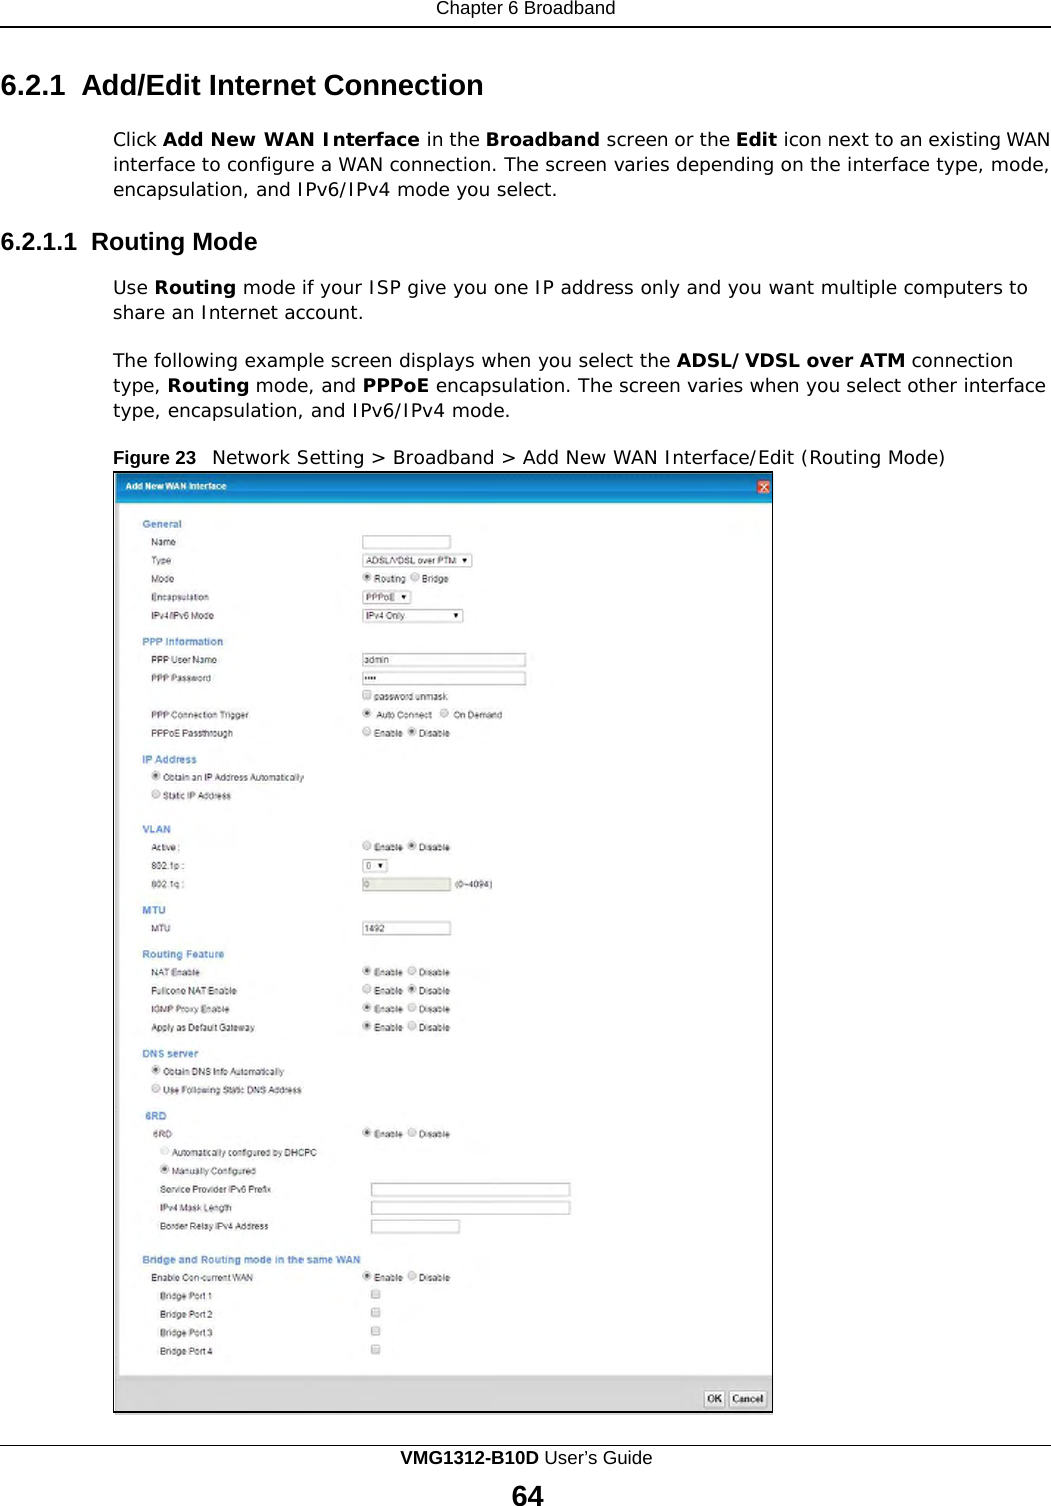 Chapter 6 Broadband      6.2.1 Add/Edit Internet Connection  Click Add New WAN Interface in the Broadband screen or the Edit icon next to an existing WAN interface to configure a WAN connection. The screen varies depending on the interface type, mode, encapsulation, and IPv6/IPv4 mode you select.  6.2.1.1 Routing Mode  Use Routing mode if your ISP give you one IP address only and you want multiple computers to share an Internet account.  The following example screen displays when you select the ADSL/VDSL over ATM connection type, Routing mode, and PPPoE encapsulation. The screen varies when you select other interface type, encapsulation, and IPv6/IPv4 mode.  Figure 23   Network Setting &gt; Broadband &gt; Add New WAN Interface/Edit (Routing Mode) VMG1312-B10D User’s Guide 64  